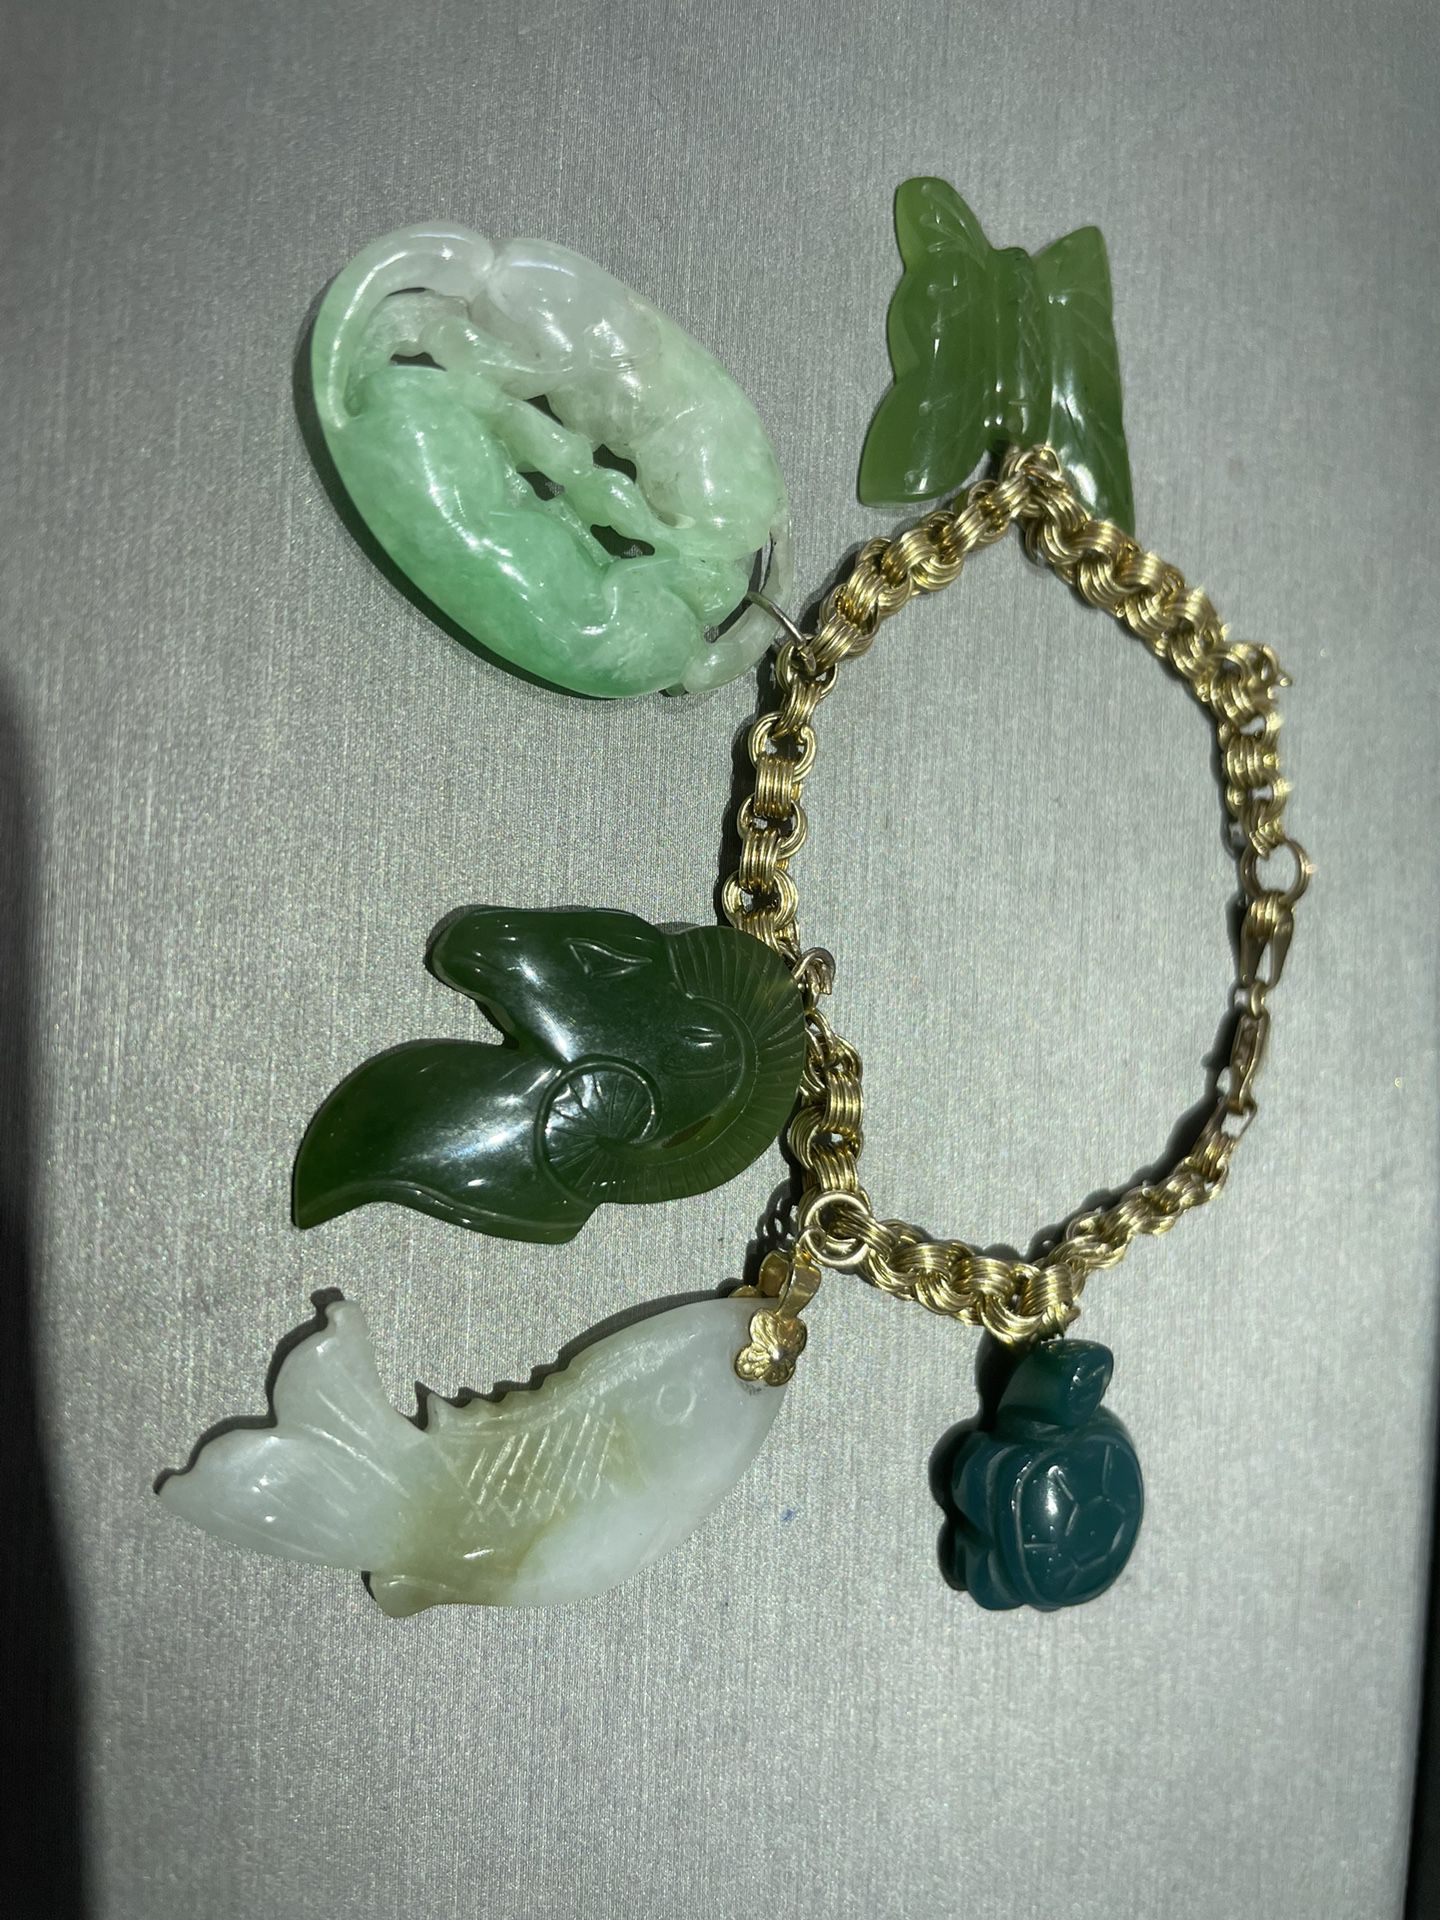 14k Yellow Gold Charm Bracelet with 5 Jade Charms (missing the 6th)